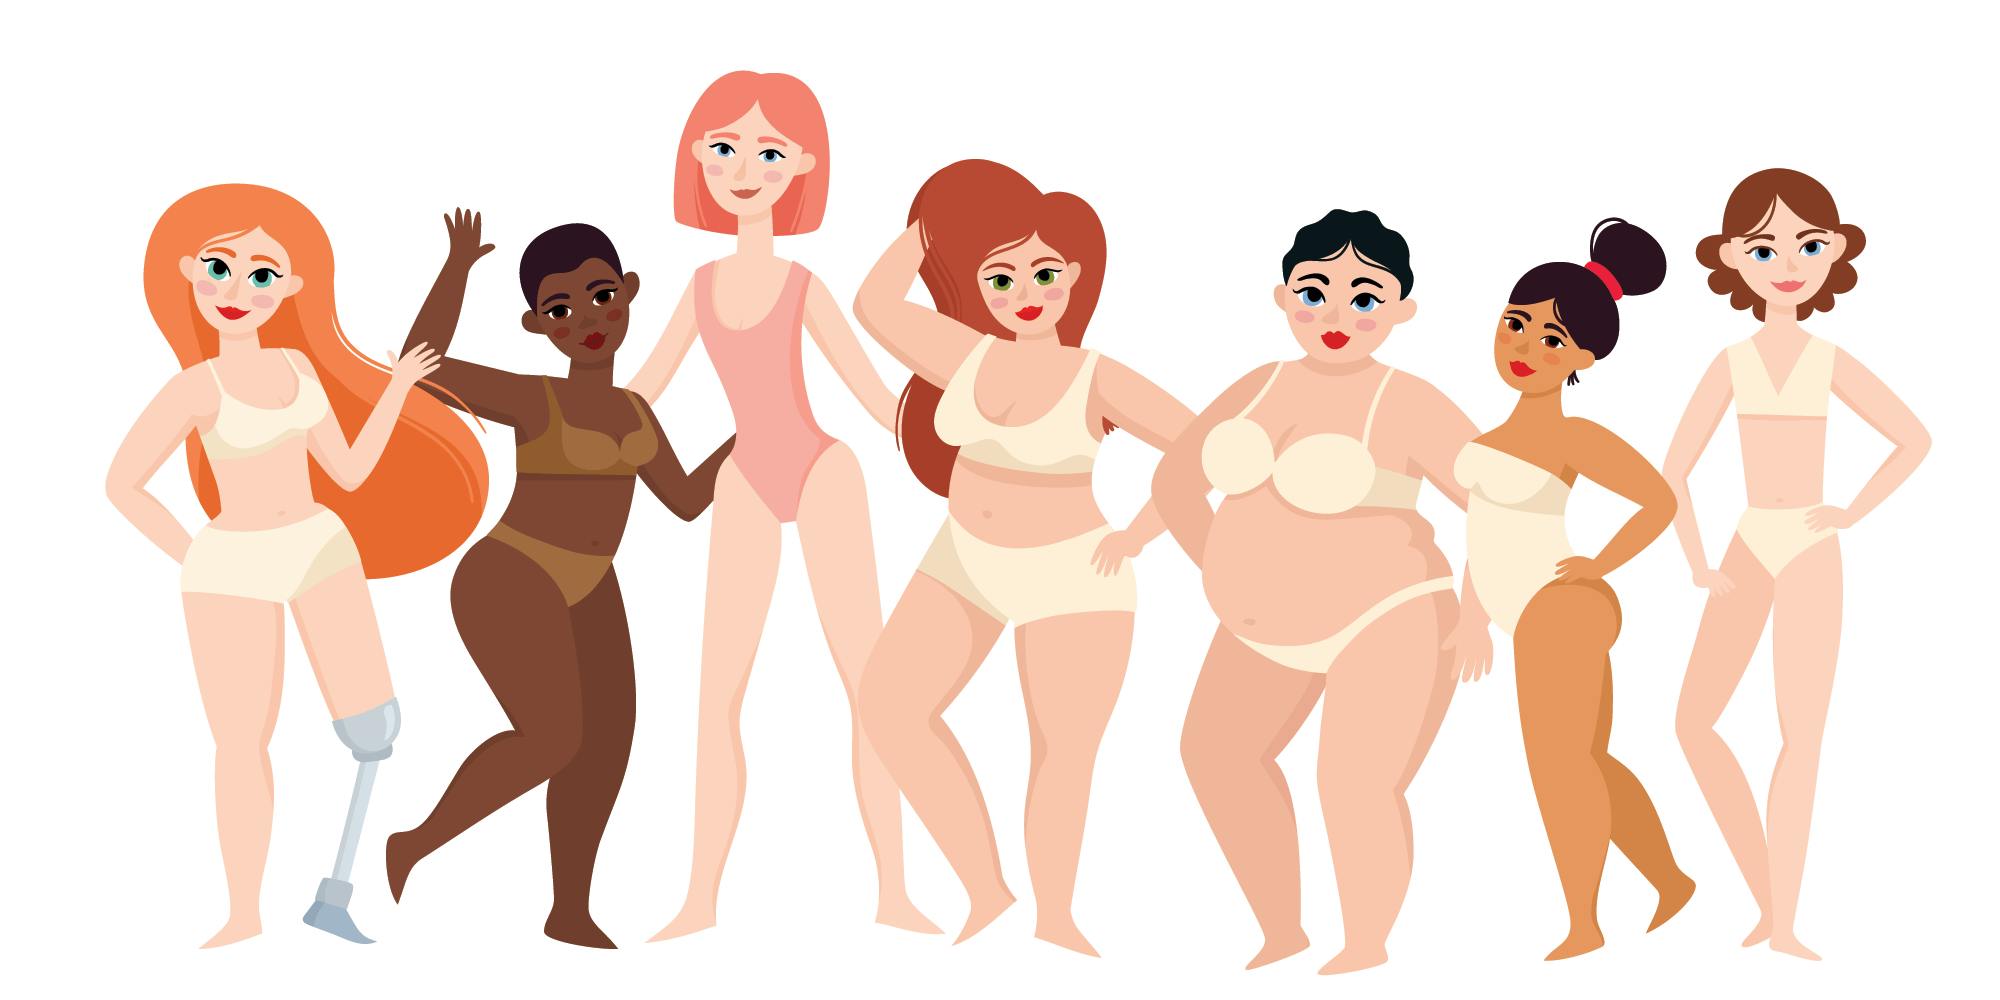 BodyPositivity: The Controversial Hashtag Sparking Body Wars